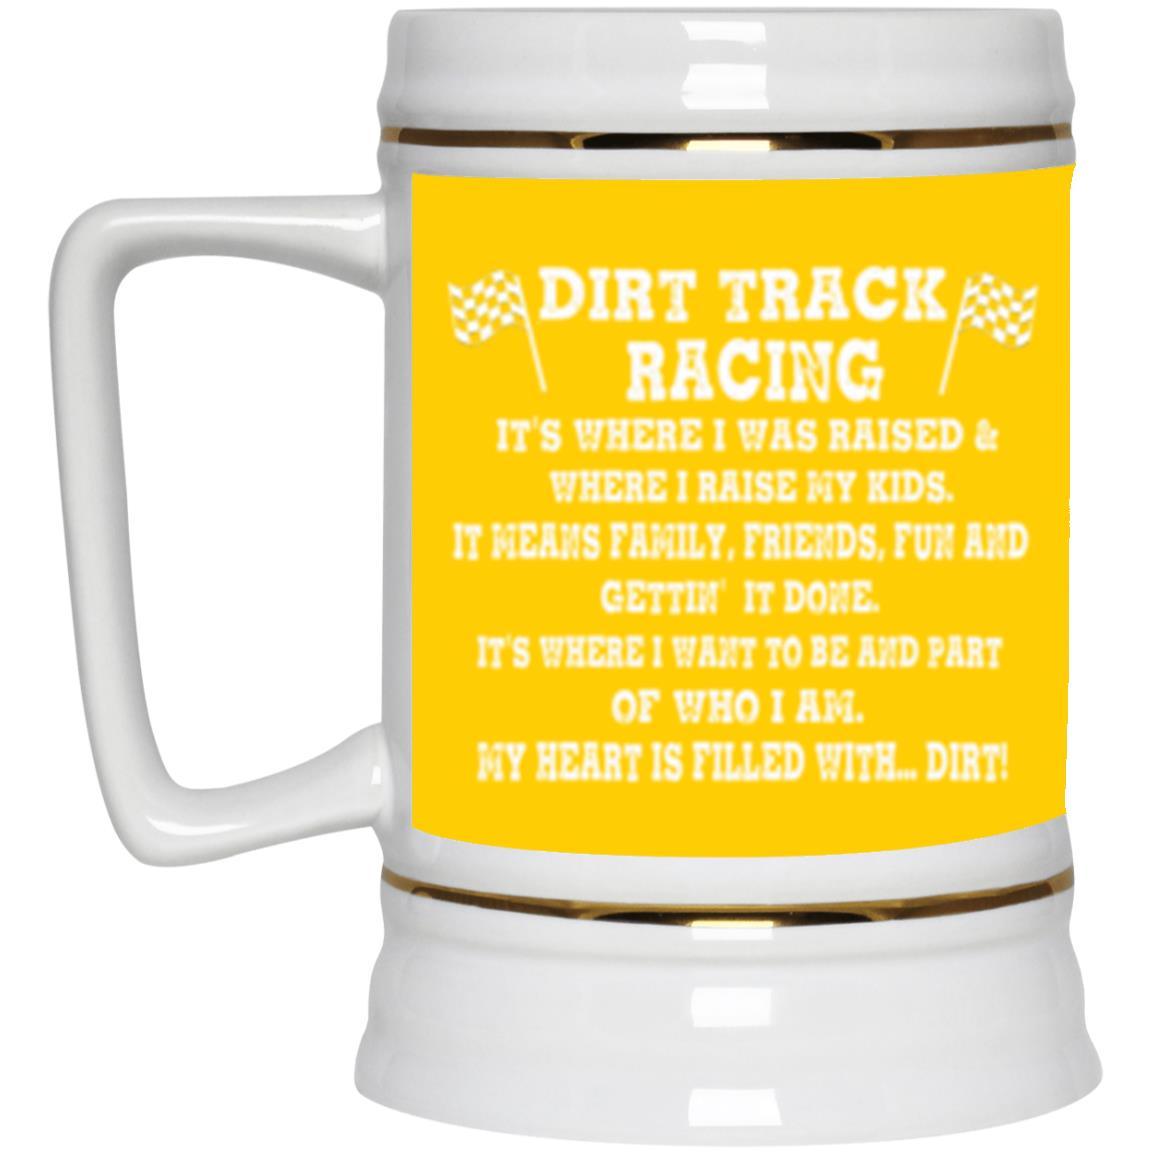 Dirt Track Racing It's Where I Was Raised Beer Stein 22oz.